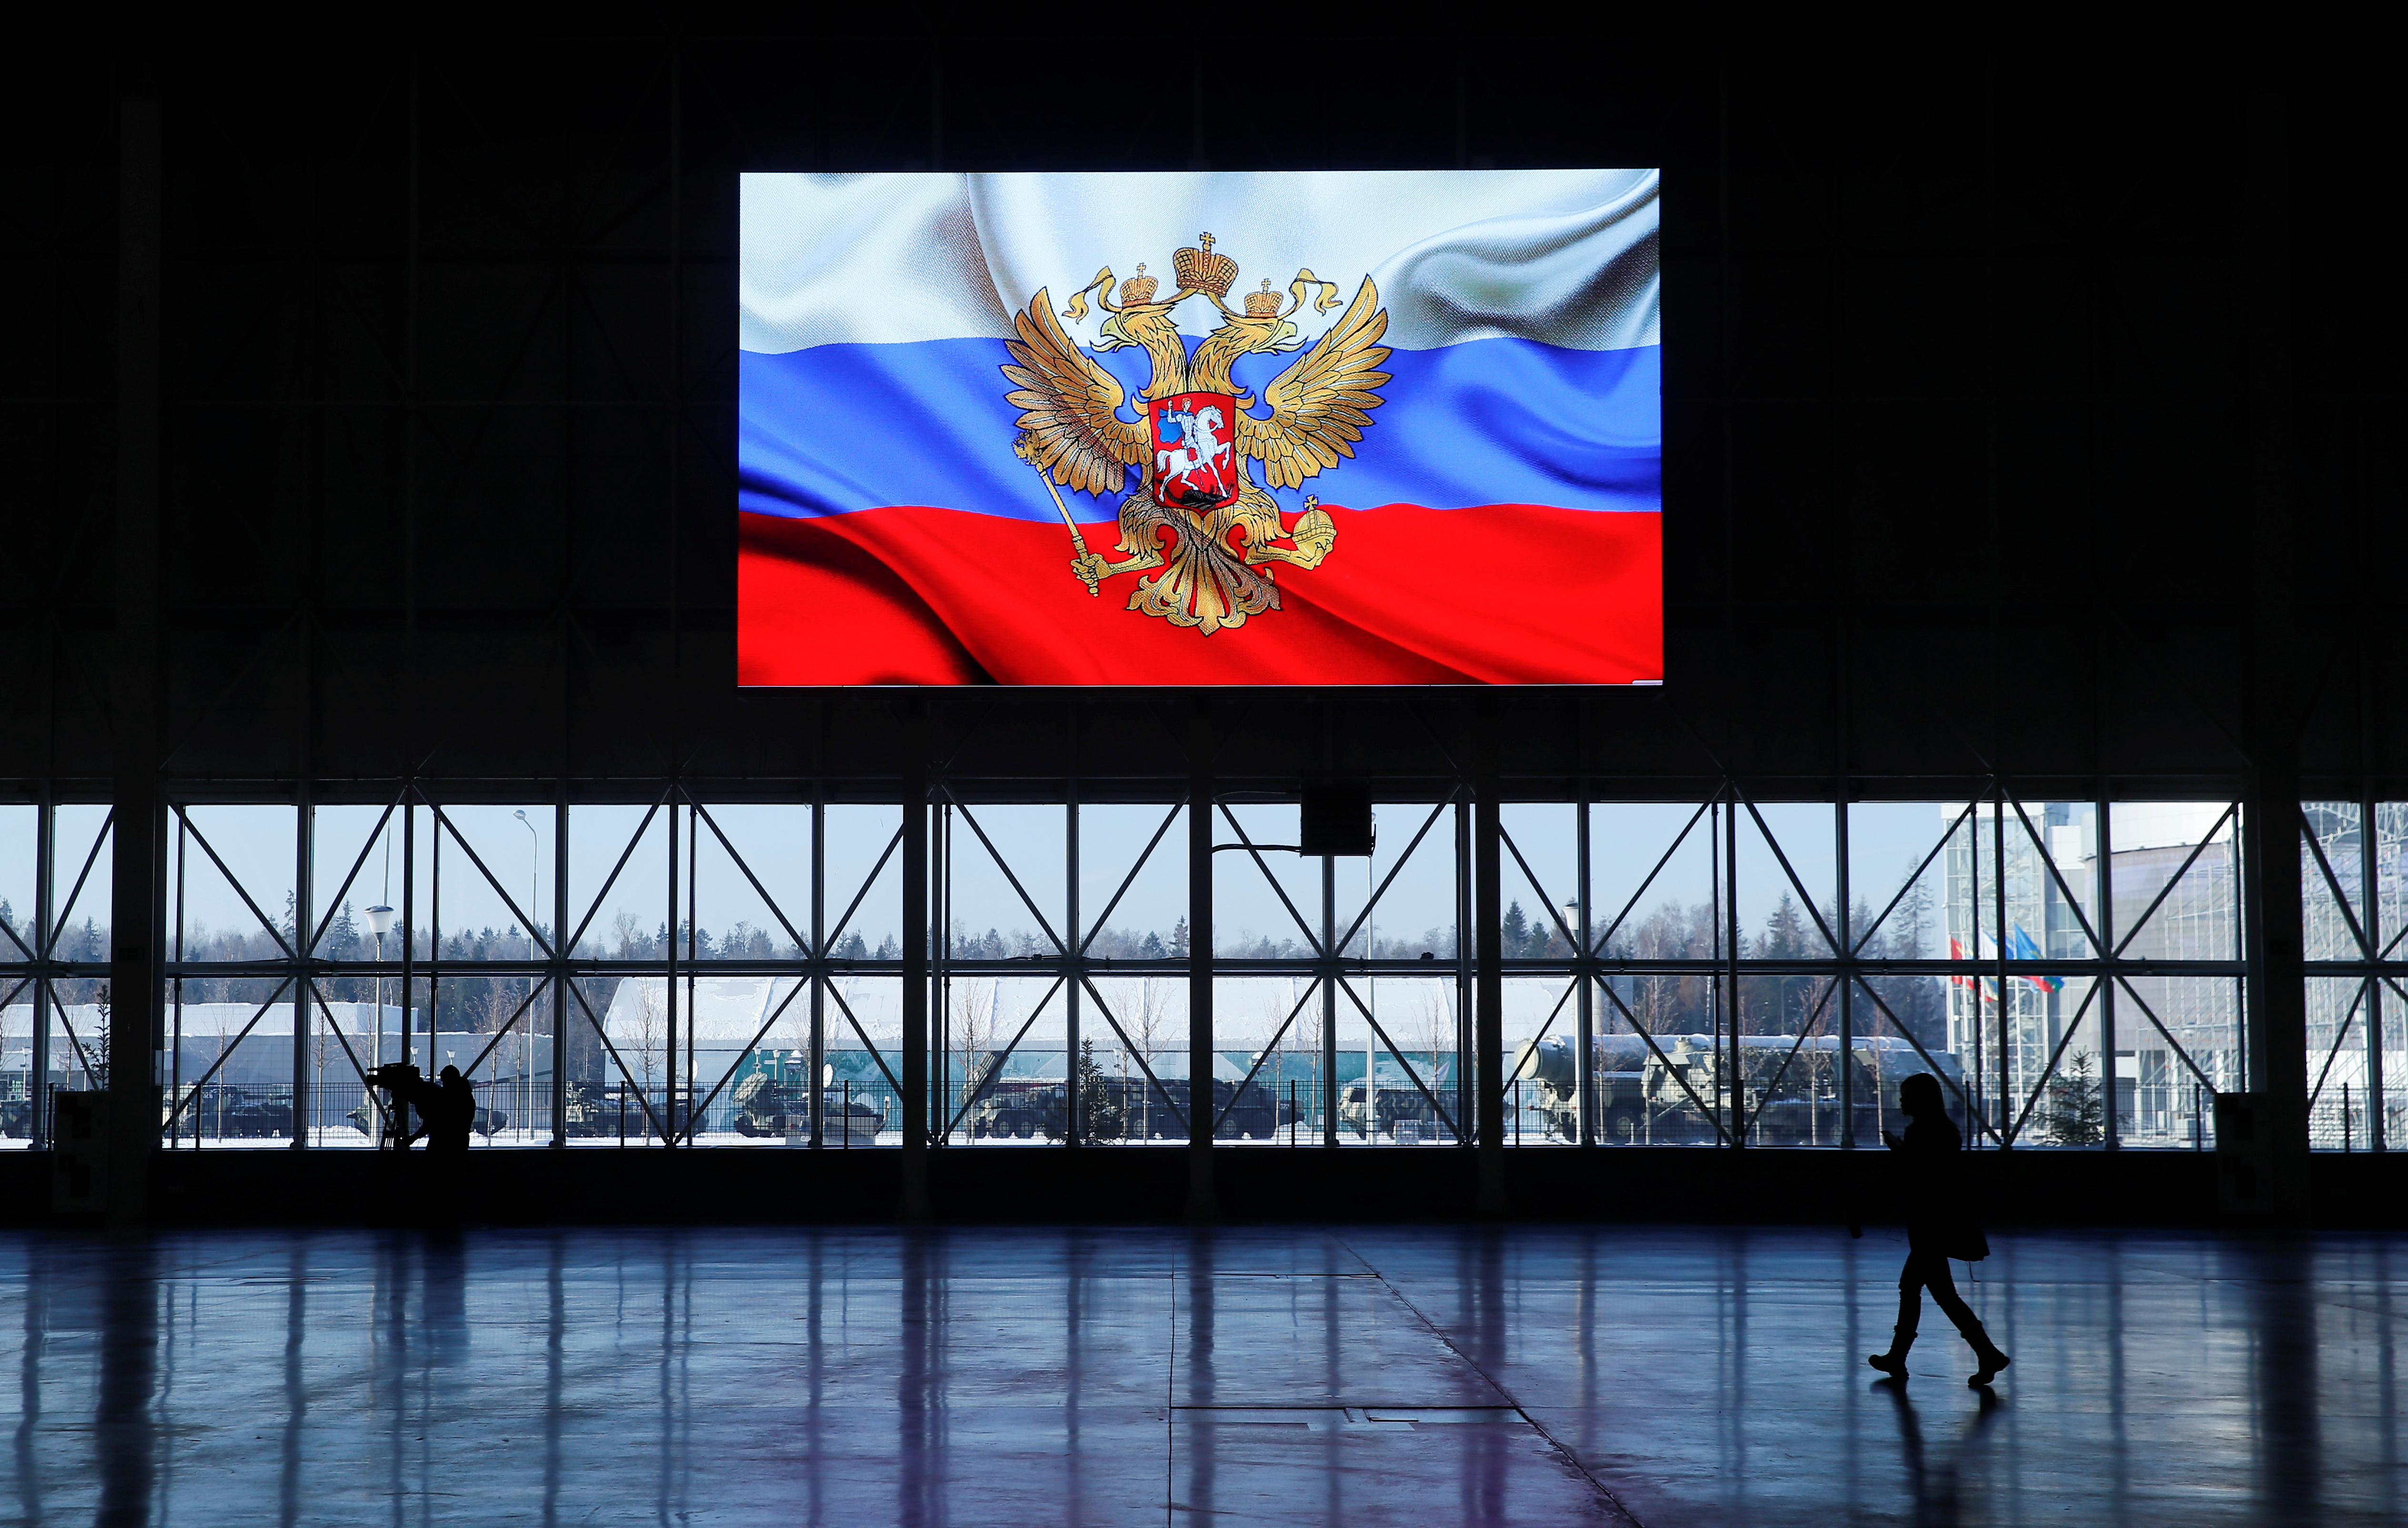 A view shows a screen displaying a flag with the Russian coat of arms during a news briefing, organized by Russian defence and foreign ministries and dedicated to SSC-8/9M729 cruise missile system, at Patriot Expocentre near Moscow, Russia January 23, 2019. REUTERS/Maxim Shemetov/Files